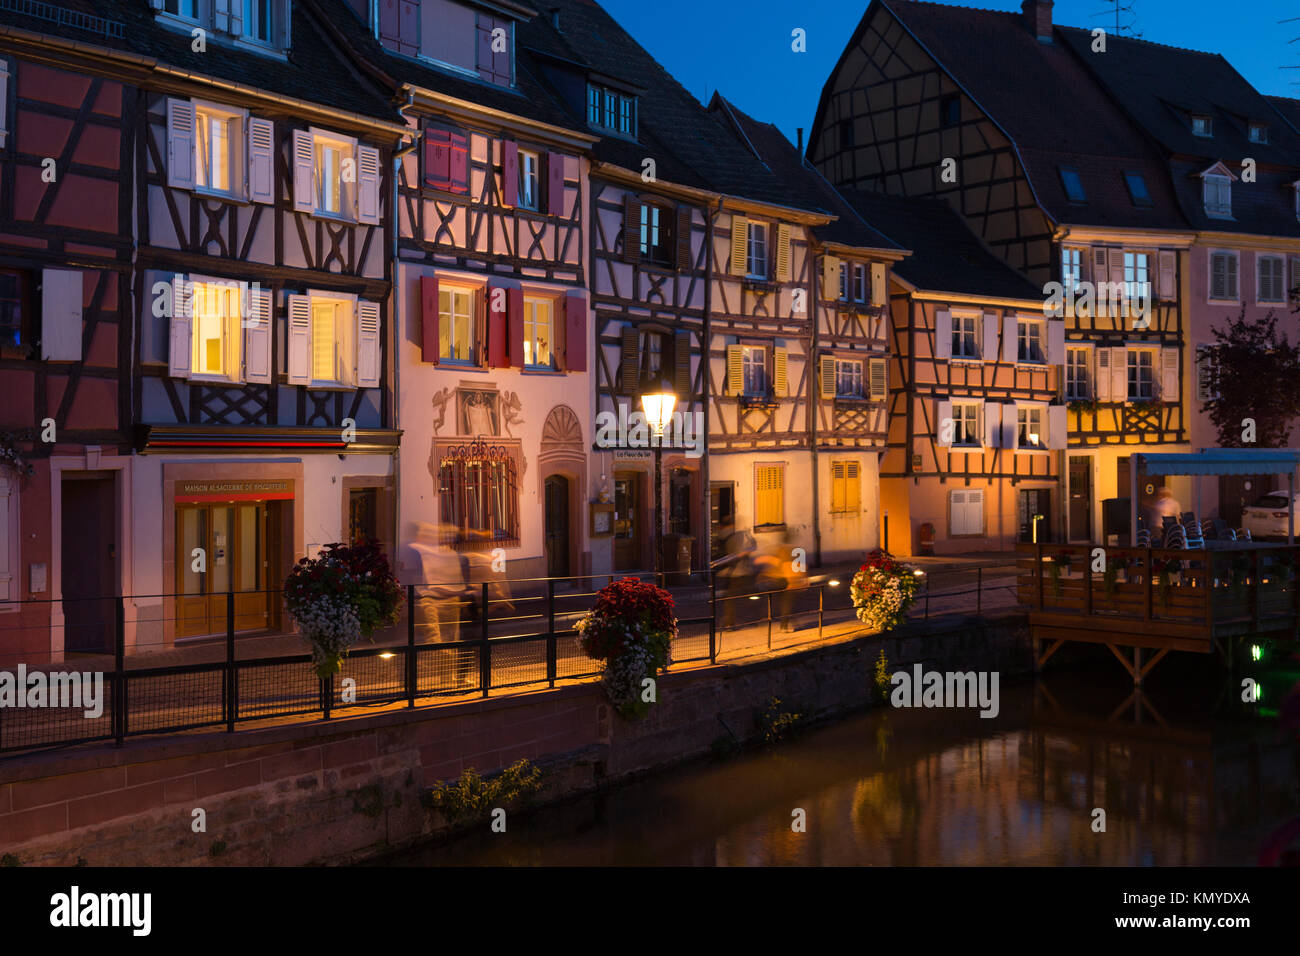 Picturesque maisons à colombages (half timbered houses) at dusk in the Petite Venice quarter of Colmar Stock Photo